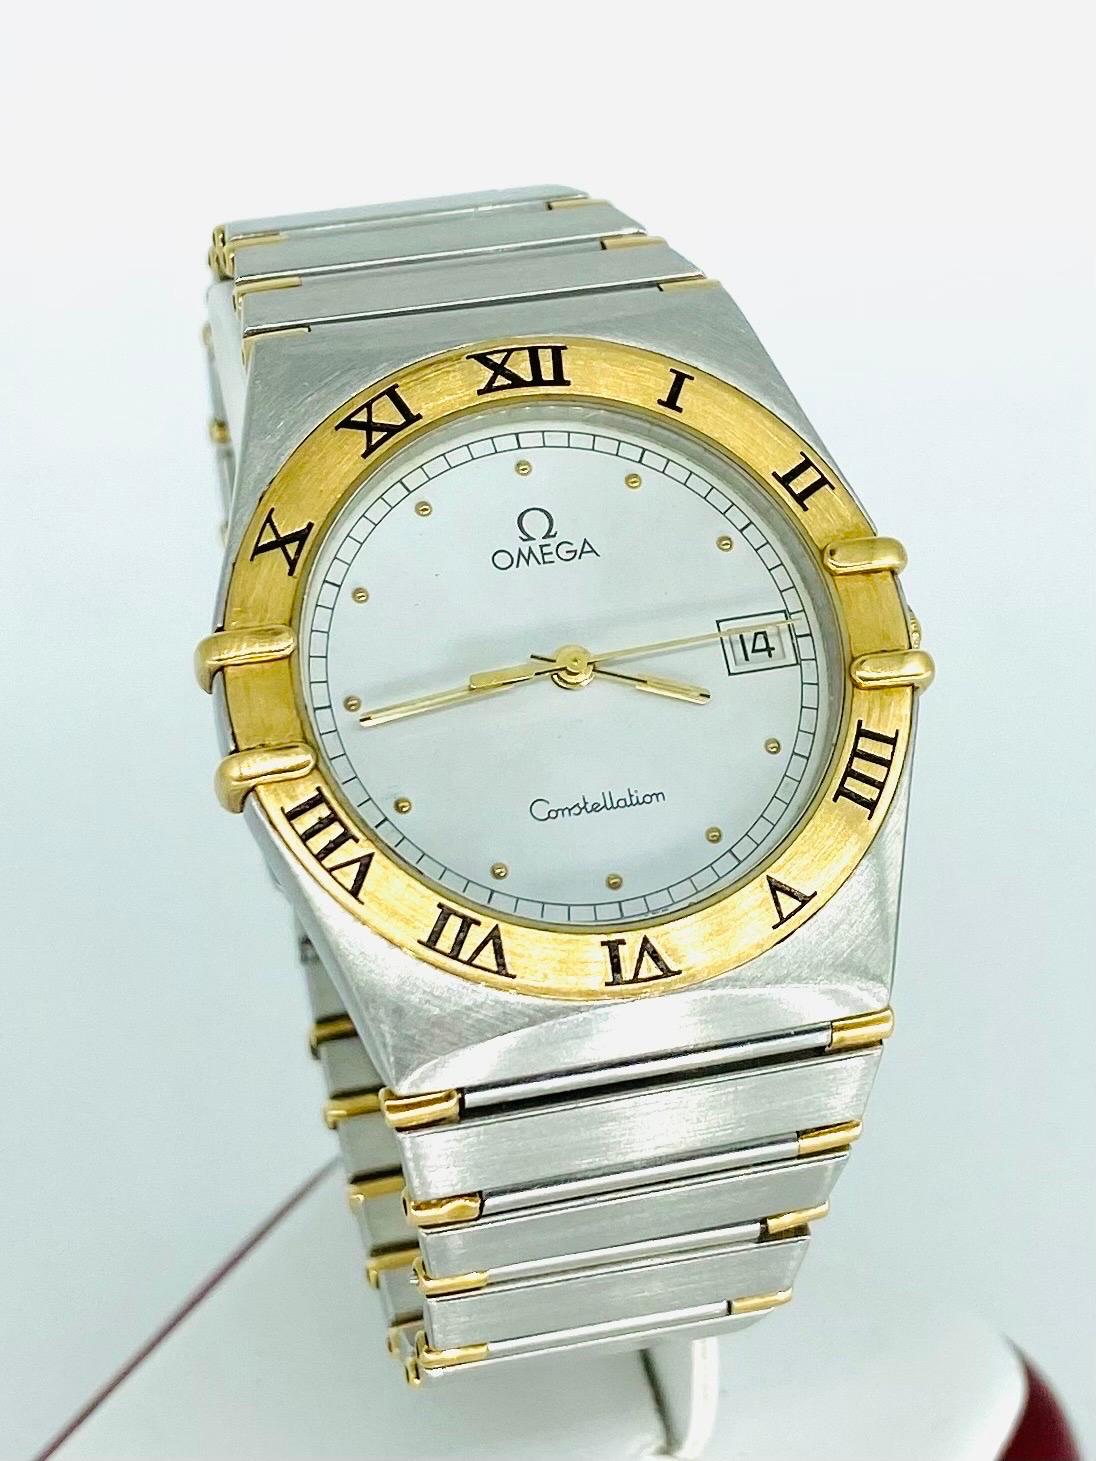 Men’s Omega 18k and Stainless Steel Date Constellation 34mm Watch. It is quartz movement and is a men's size watch. The watch is a vintage Omega. Will fit wrist of up to 6.75 inches.